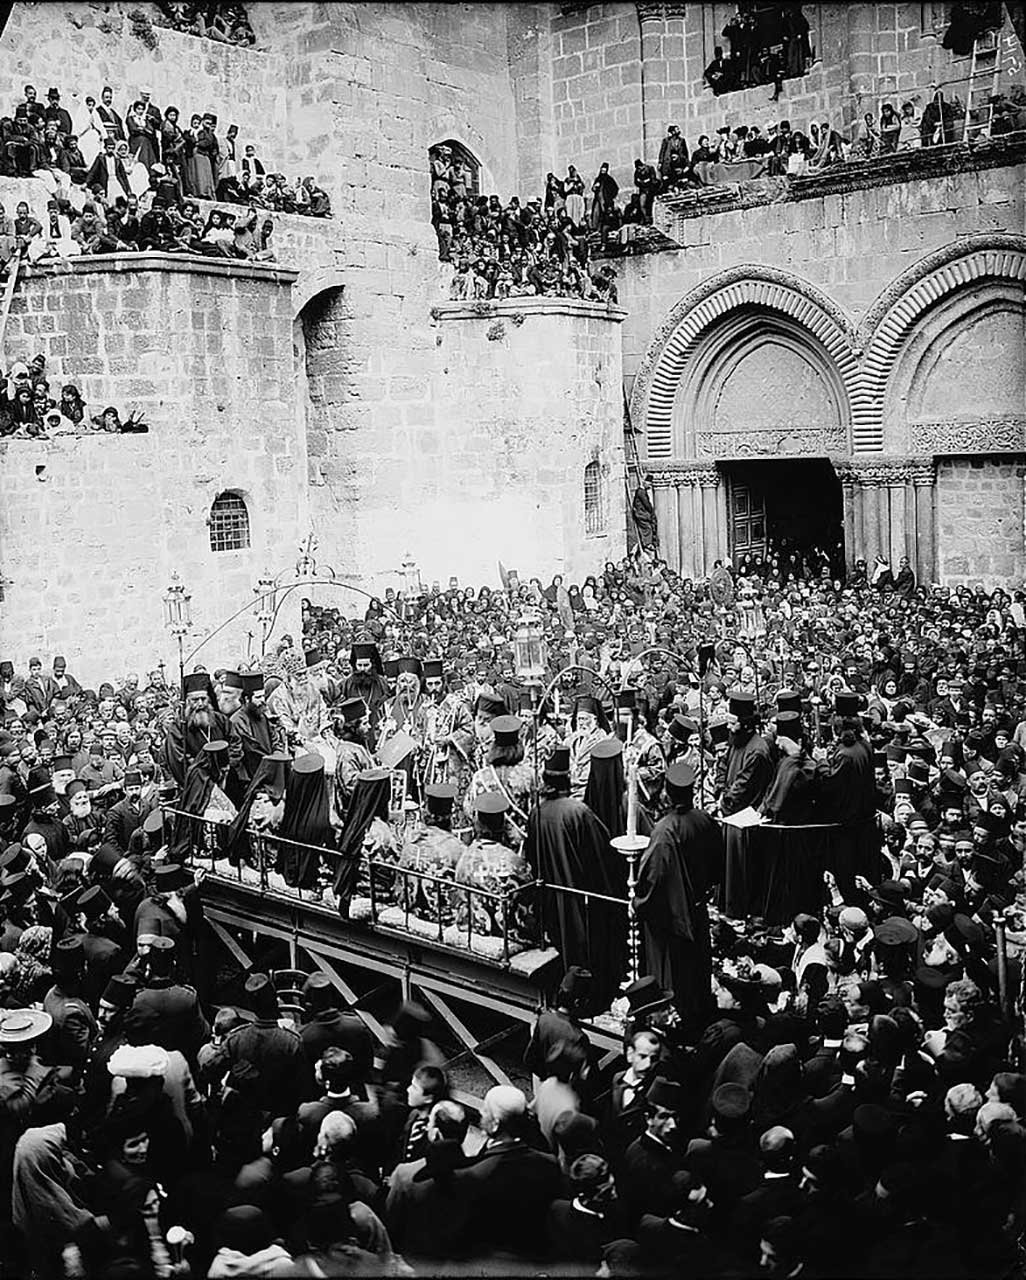 A 1930s photo from Easter week in Jerusalem, with crowds from across the region and the world gathered at the entrance of the Church of the Holy Sepulchre in Jerusalem